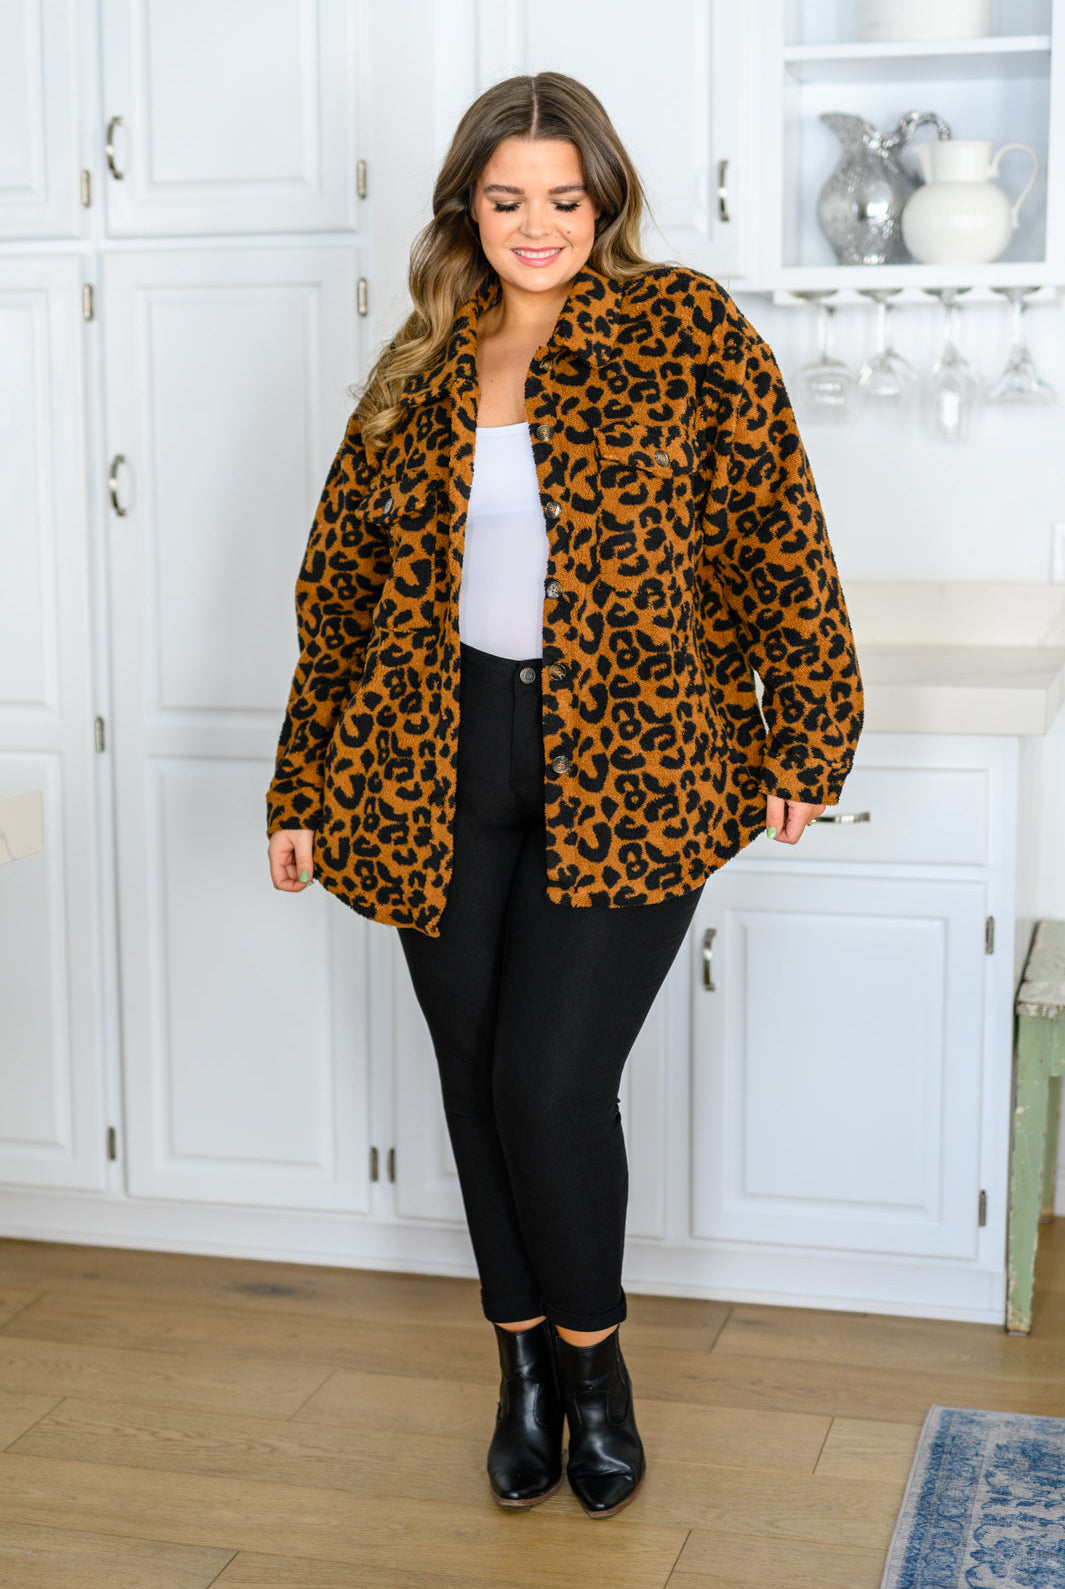 Castle Spotting Animal Print Jacket-Outerwear- Simply Simpson's Boutique is a Women's Online Fashion Boutique Located in Jupiter, Florida